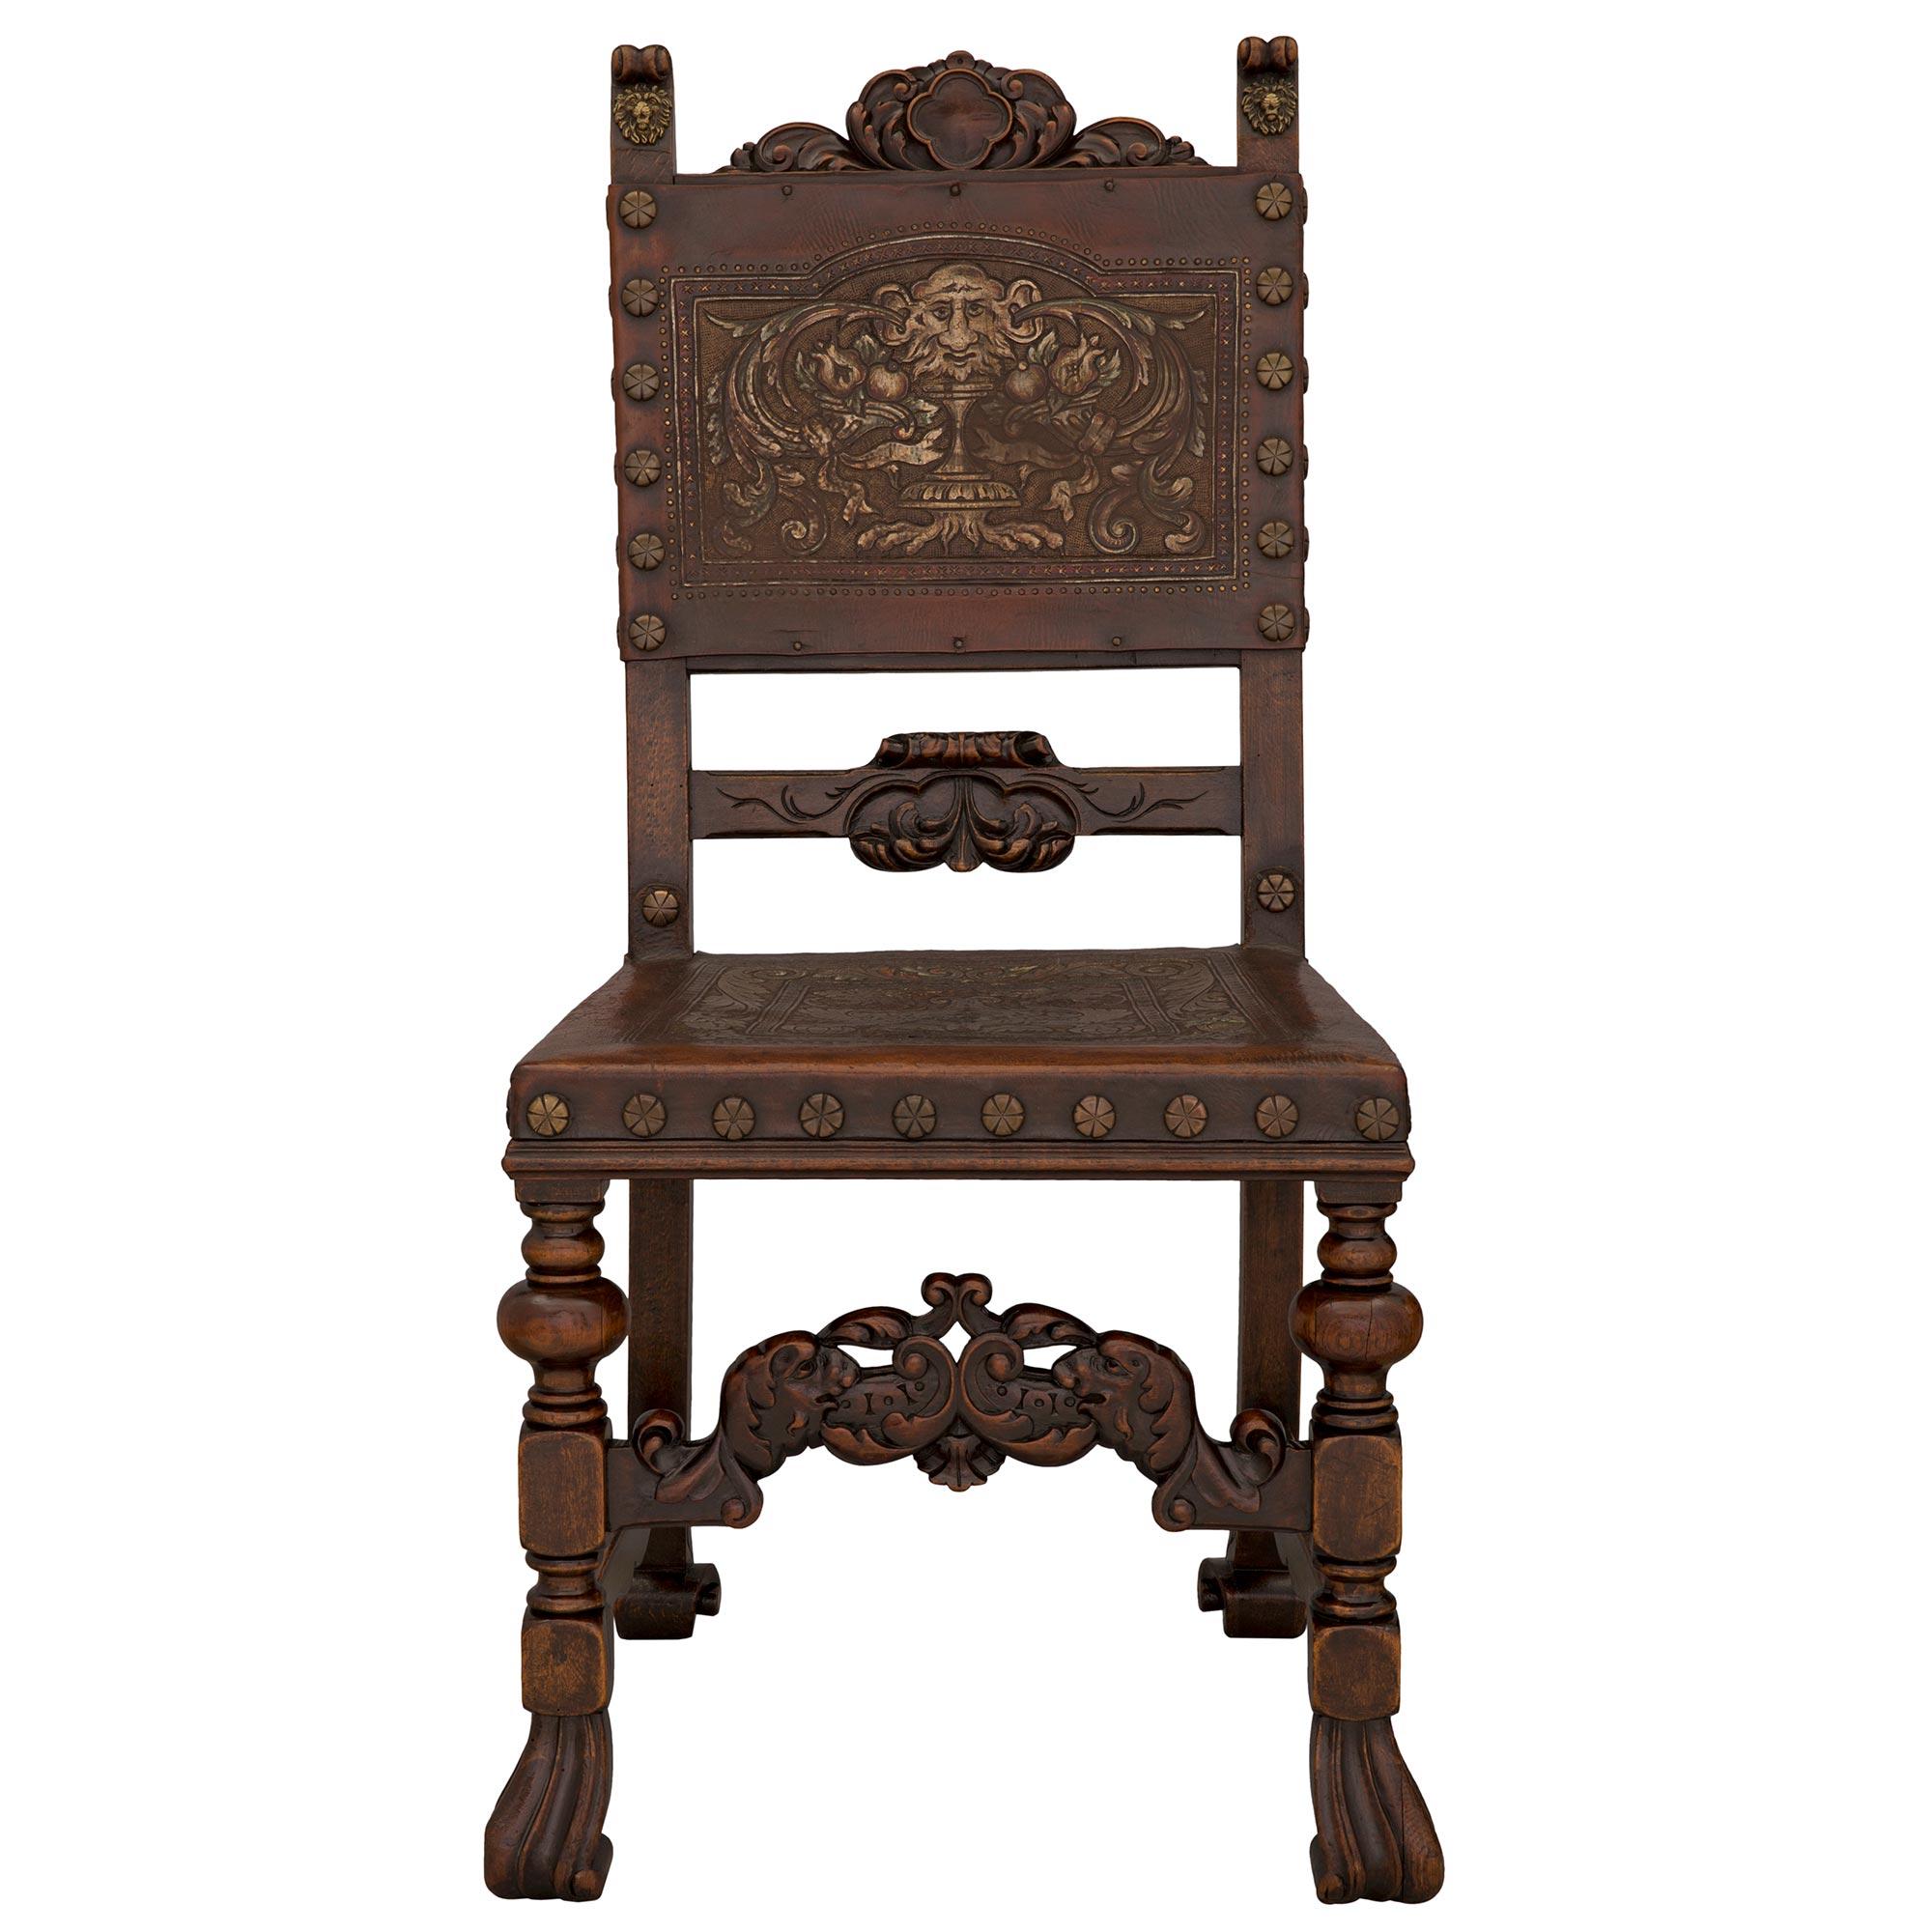 A striking and most decorative complete set of twelve Spanish 19th century walnut, pressed leather, and bronze dining chairs. Each chair is raised by beautiful most unique scrolled feet below block reserves and turned legs. Each leg is connected by